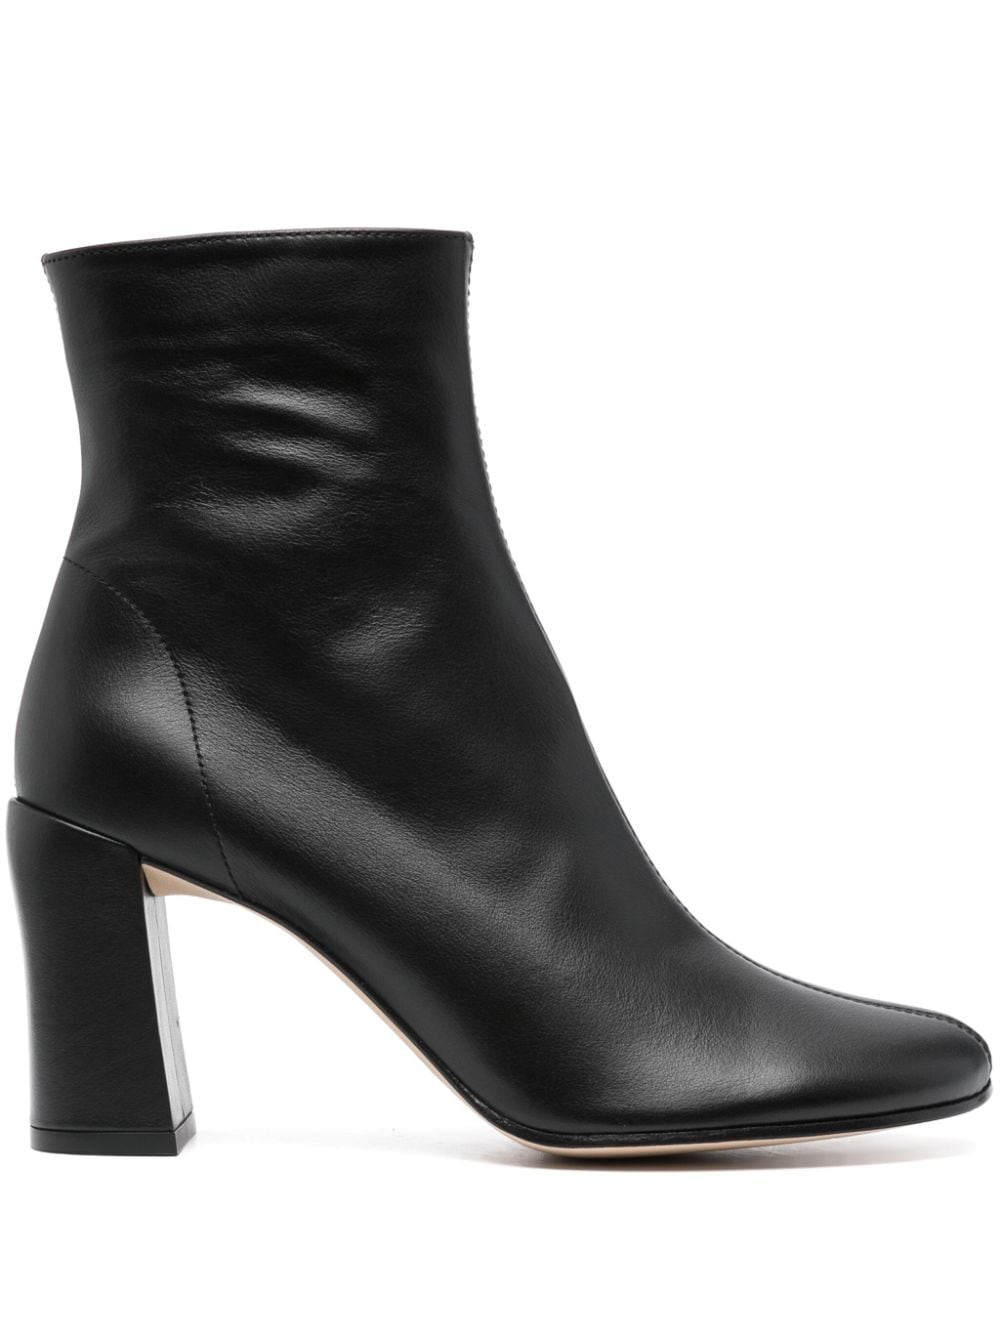 BY FAR Vlada 90mm ankle boots - Black